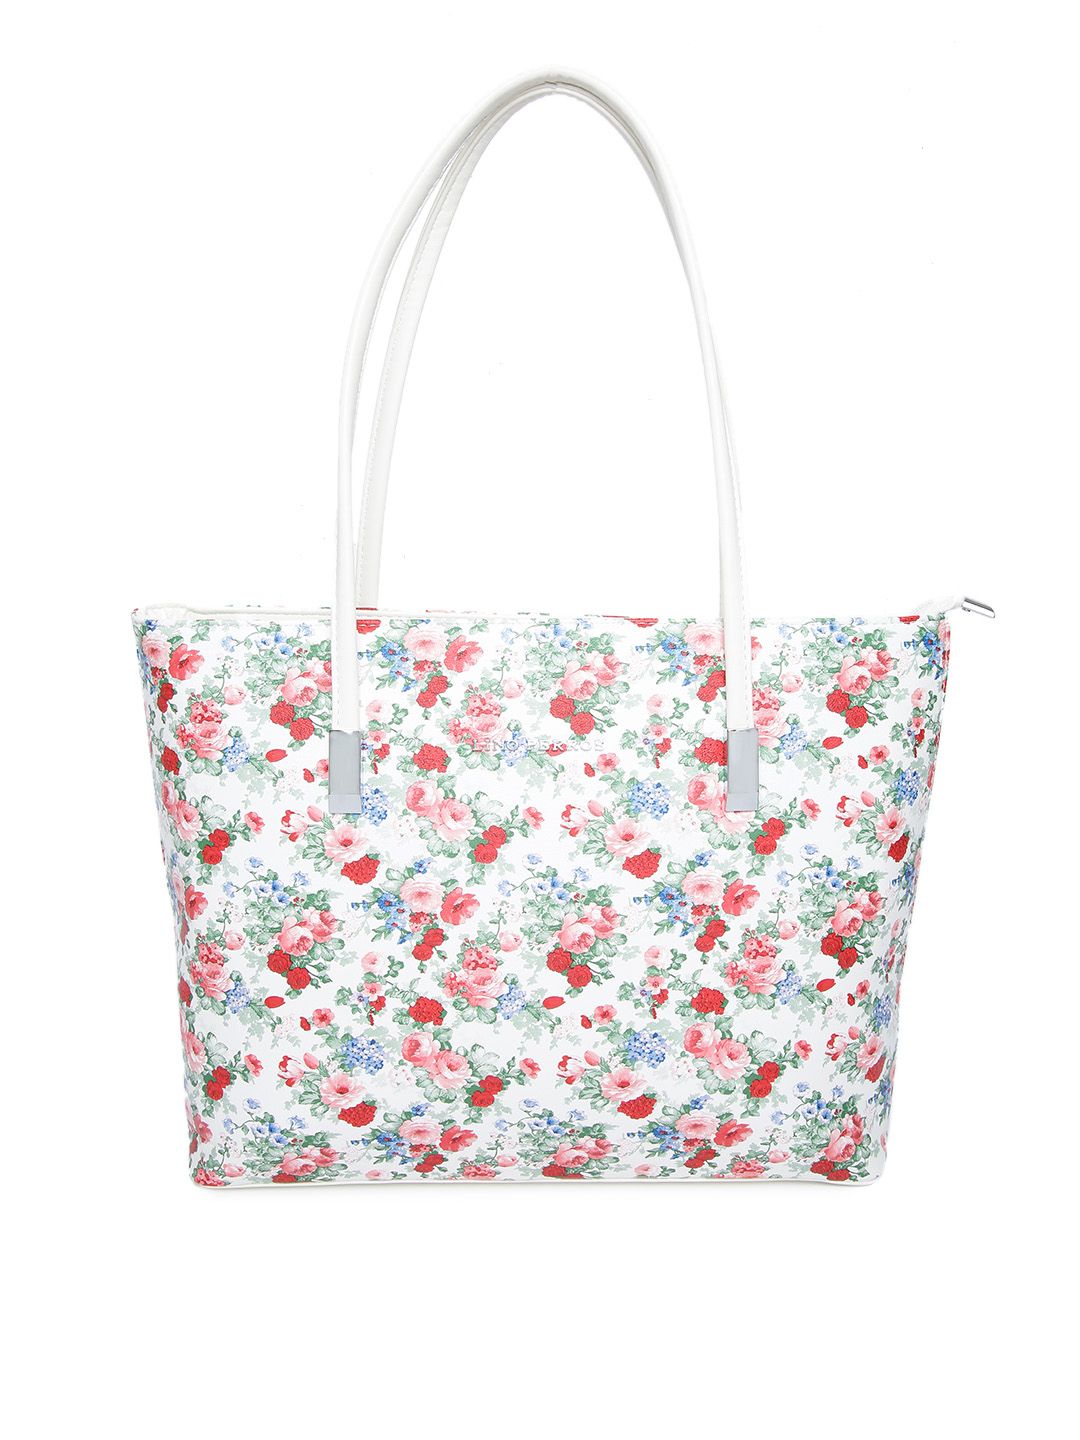 Lino Perros White & Red Floral Print Shoulder Bag Price in India